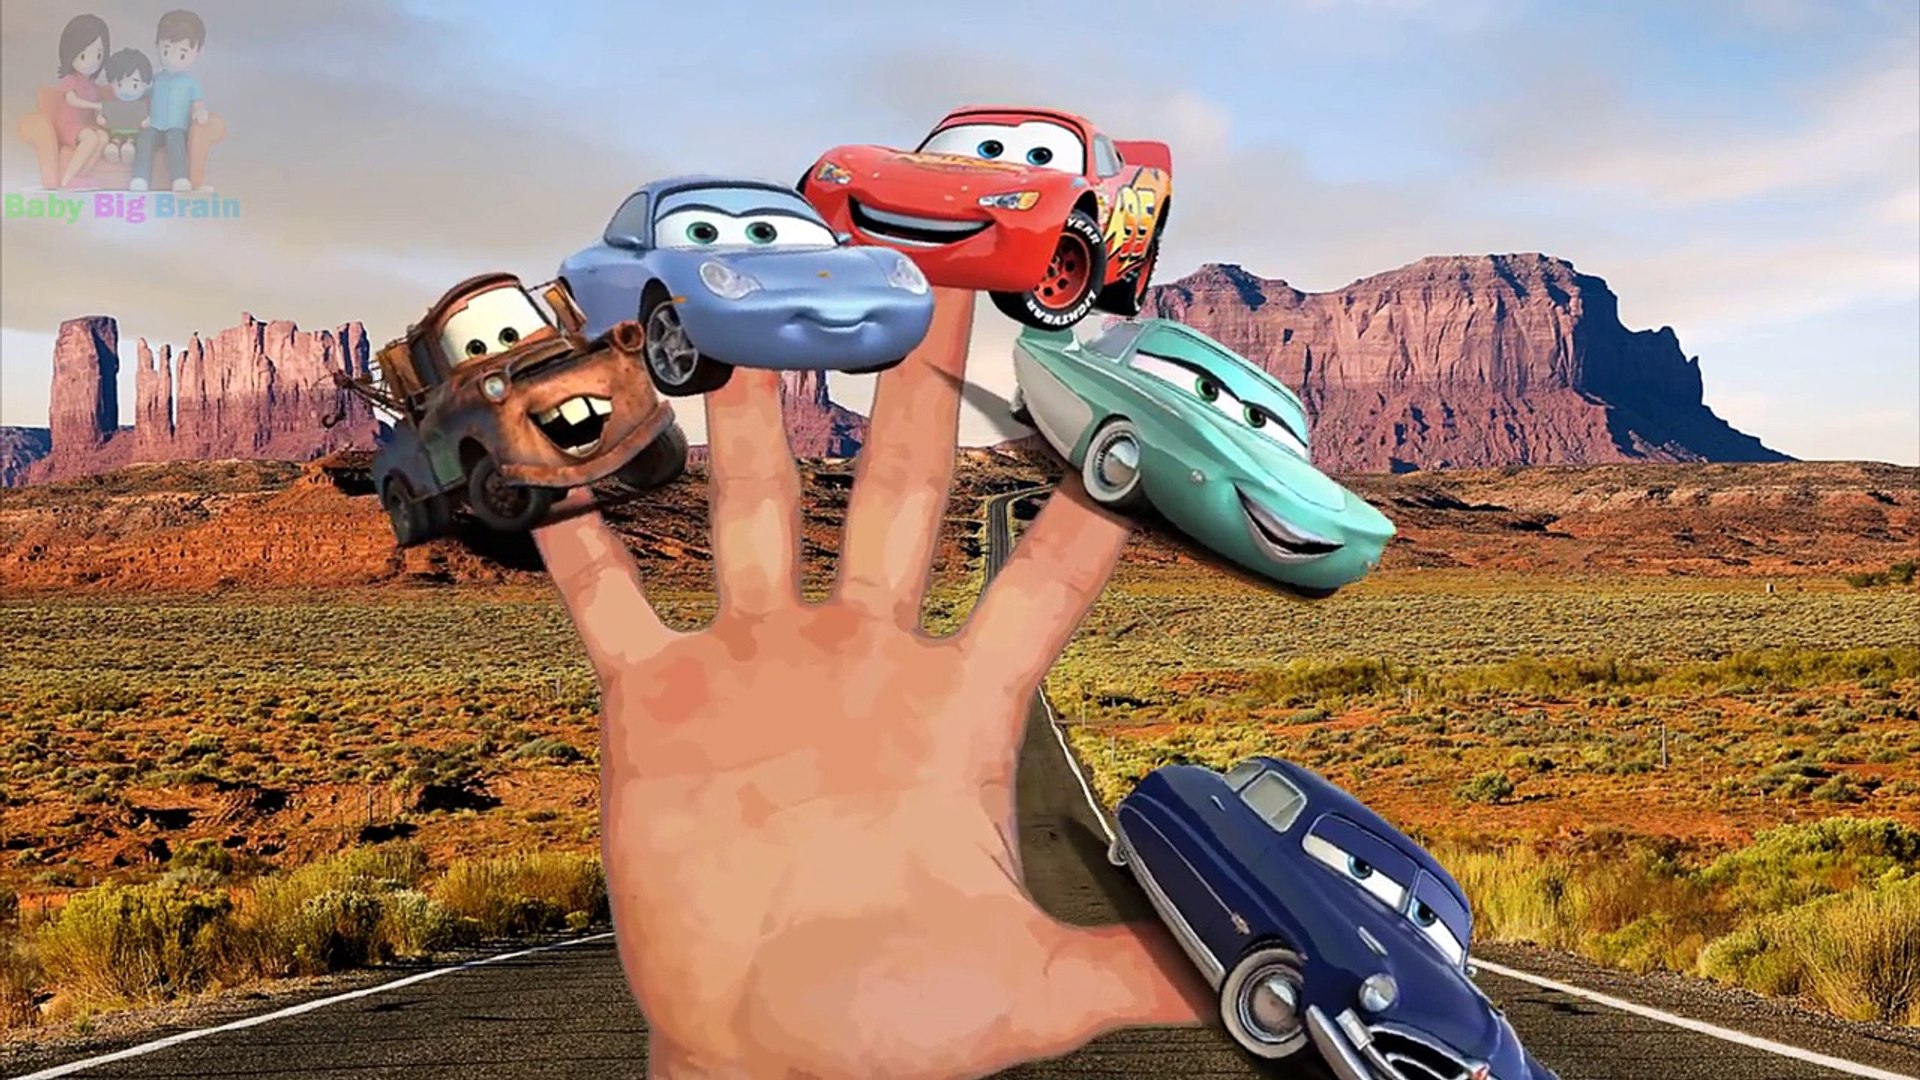 CARS Finger Family Nursery Rhymes for Kids  MY FINGER FAMILY RHYMES -  Dailymotion Video